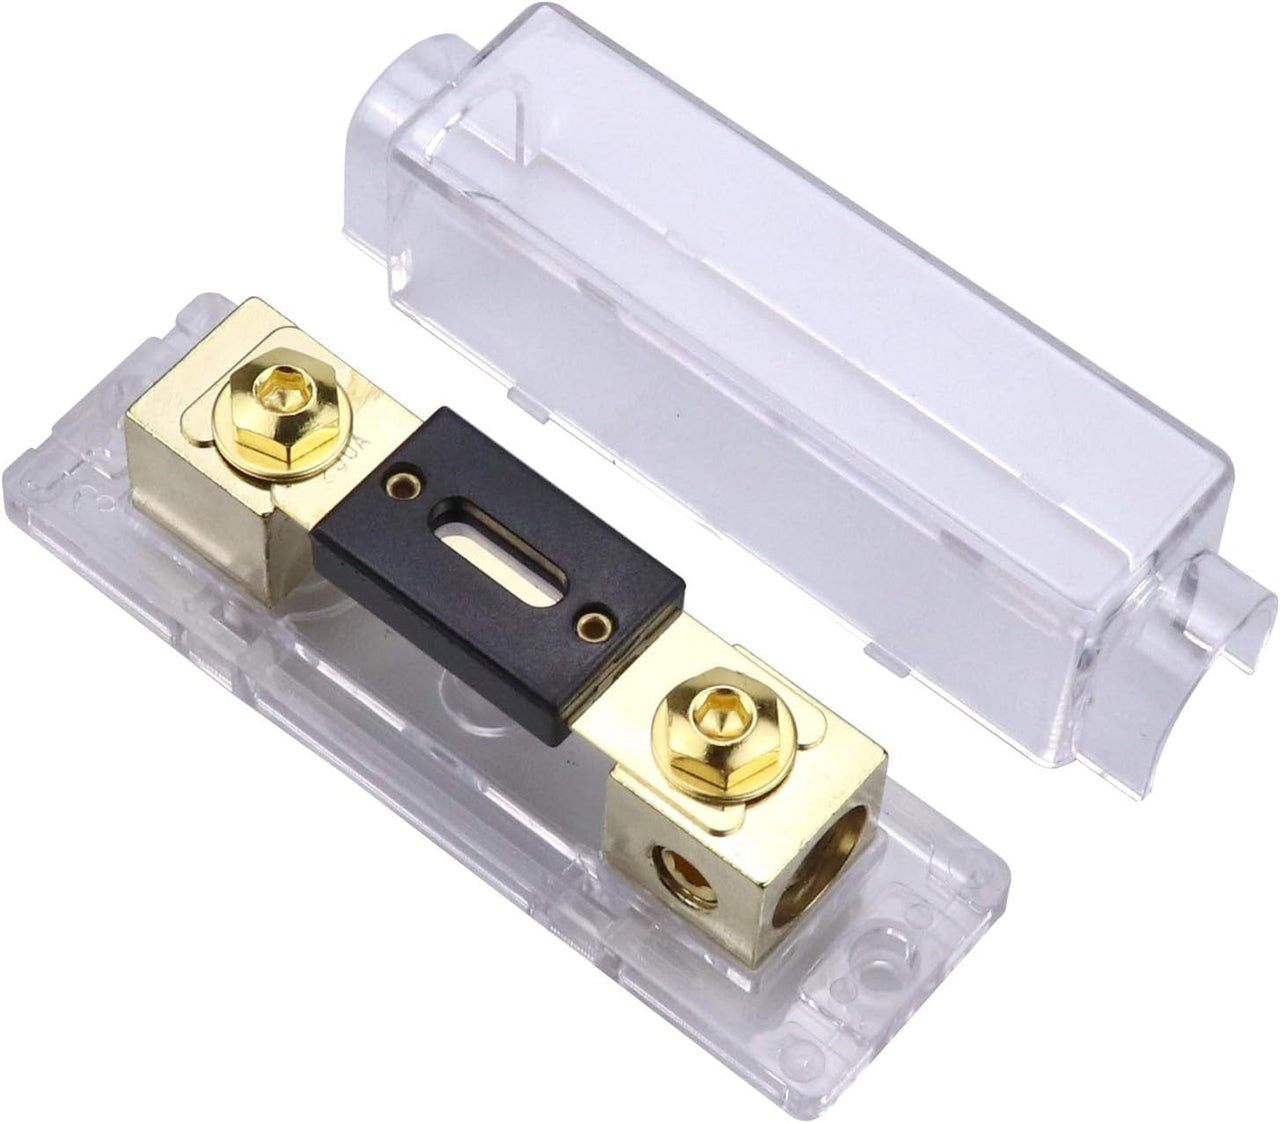 2 Absolute ANH-3 0/2/4 Gauge AWG in-Line ANL Fuse Holder & 2 Gold Plated 150 Amp Fuse